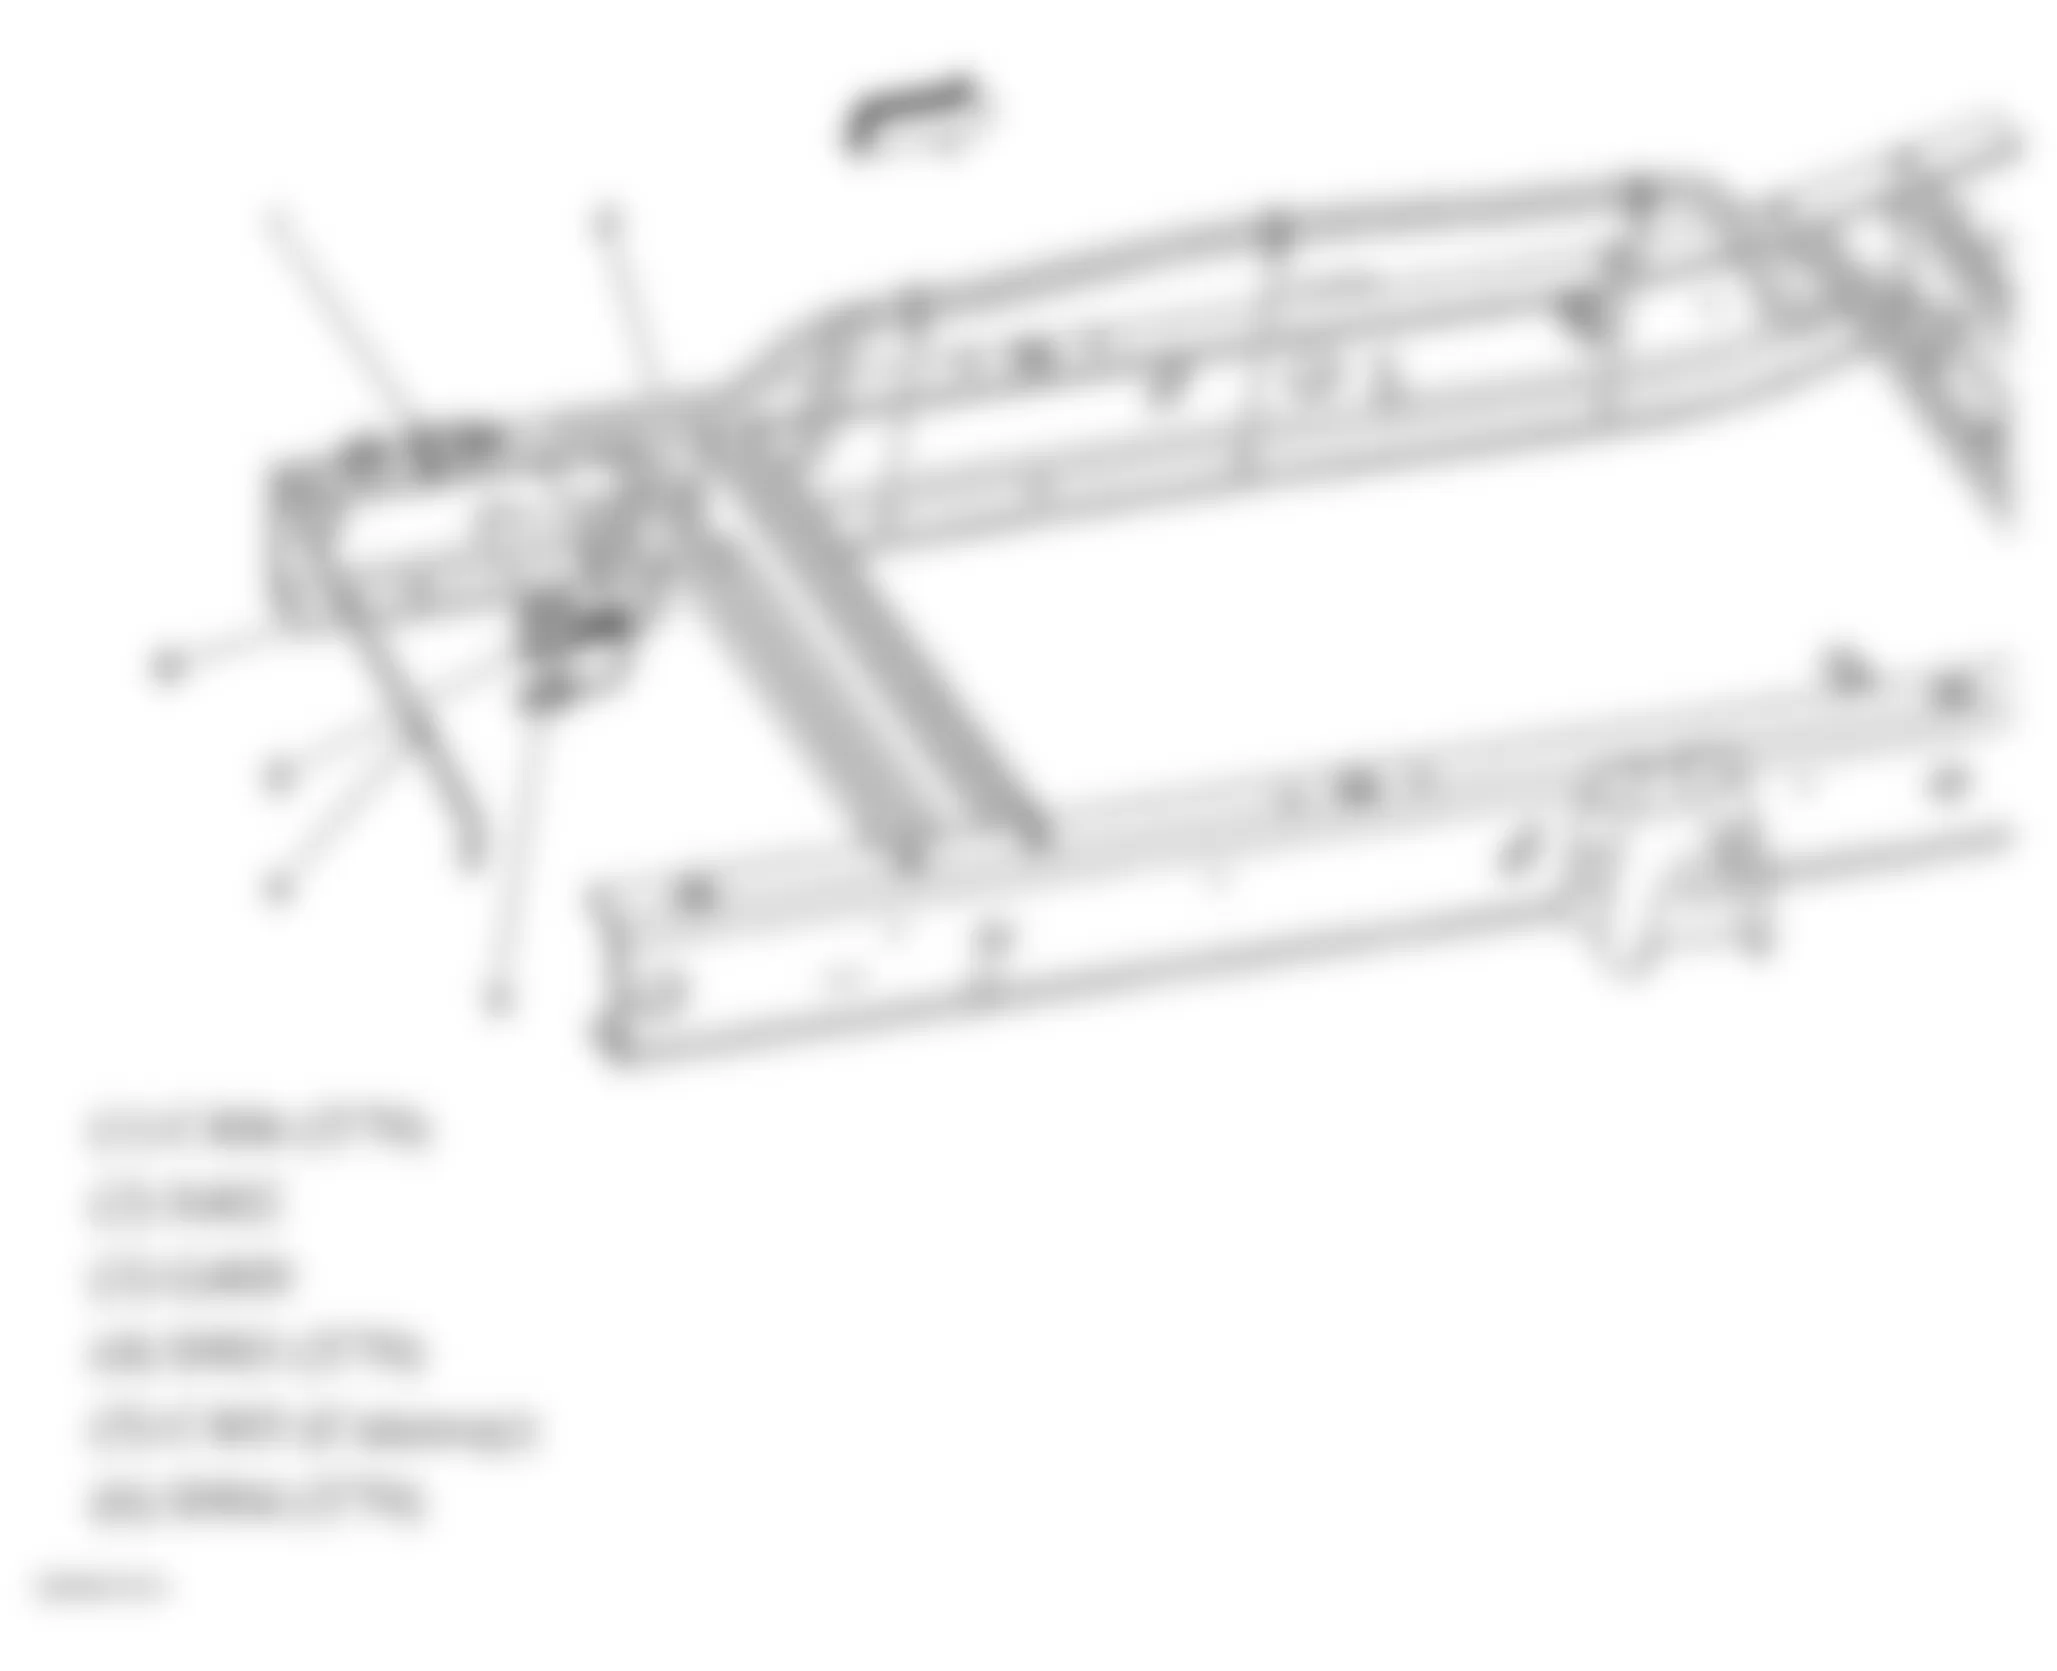 GMC Savana H1500 2008 - Component Locations -  Rear Chassis (Cutaway)